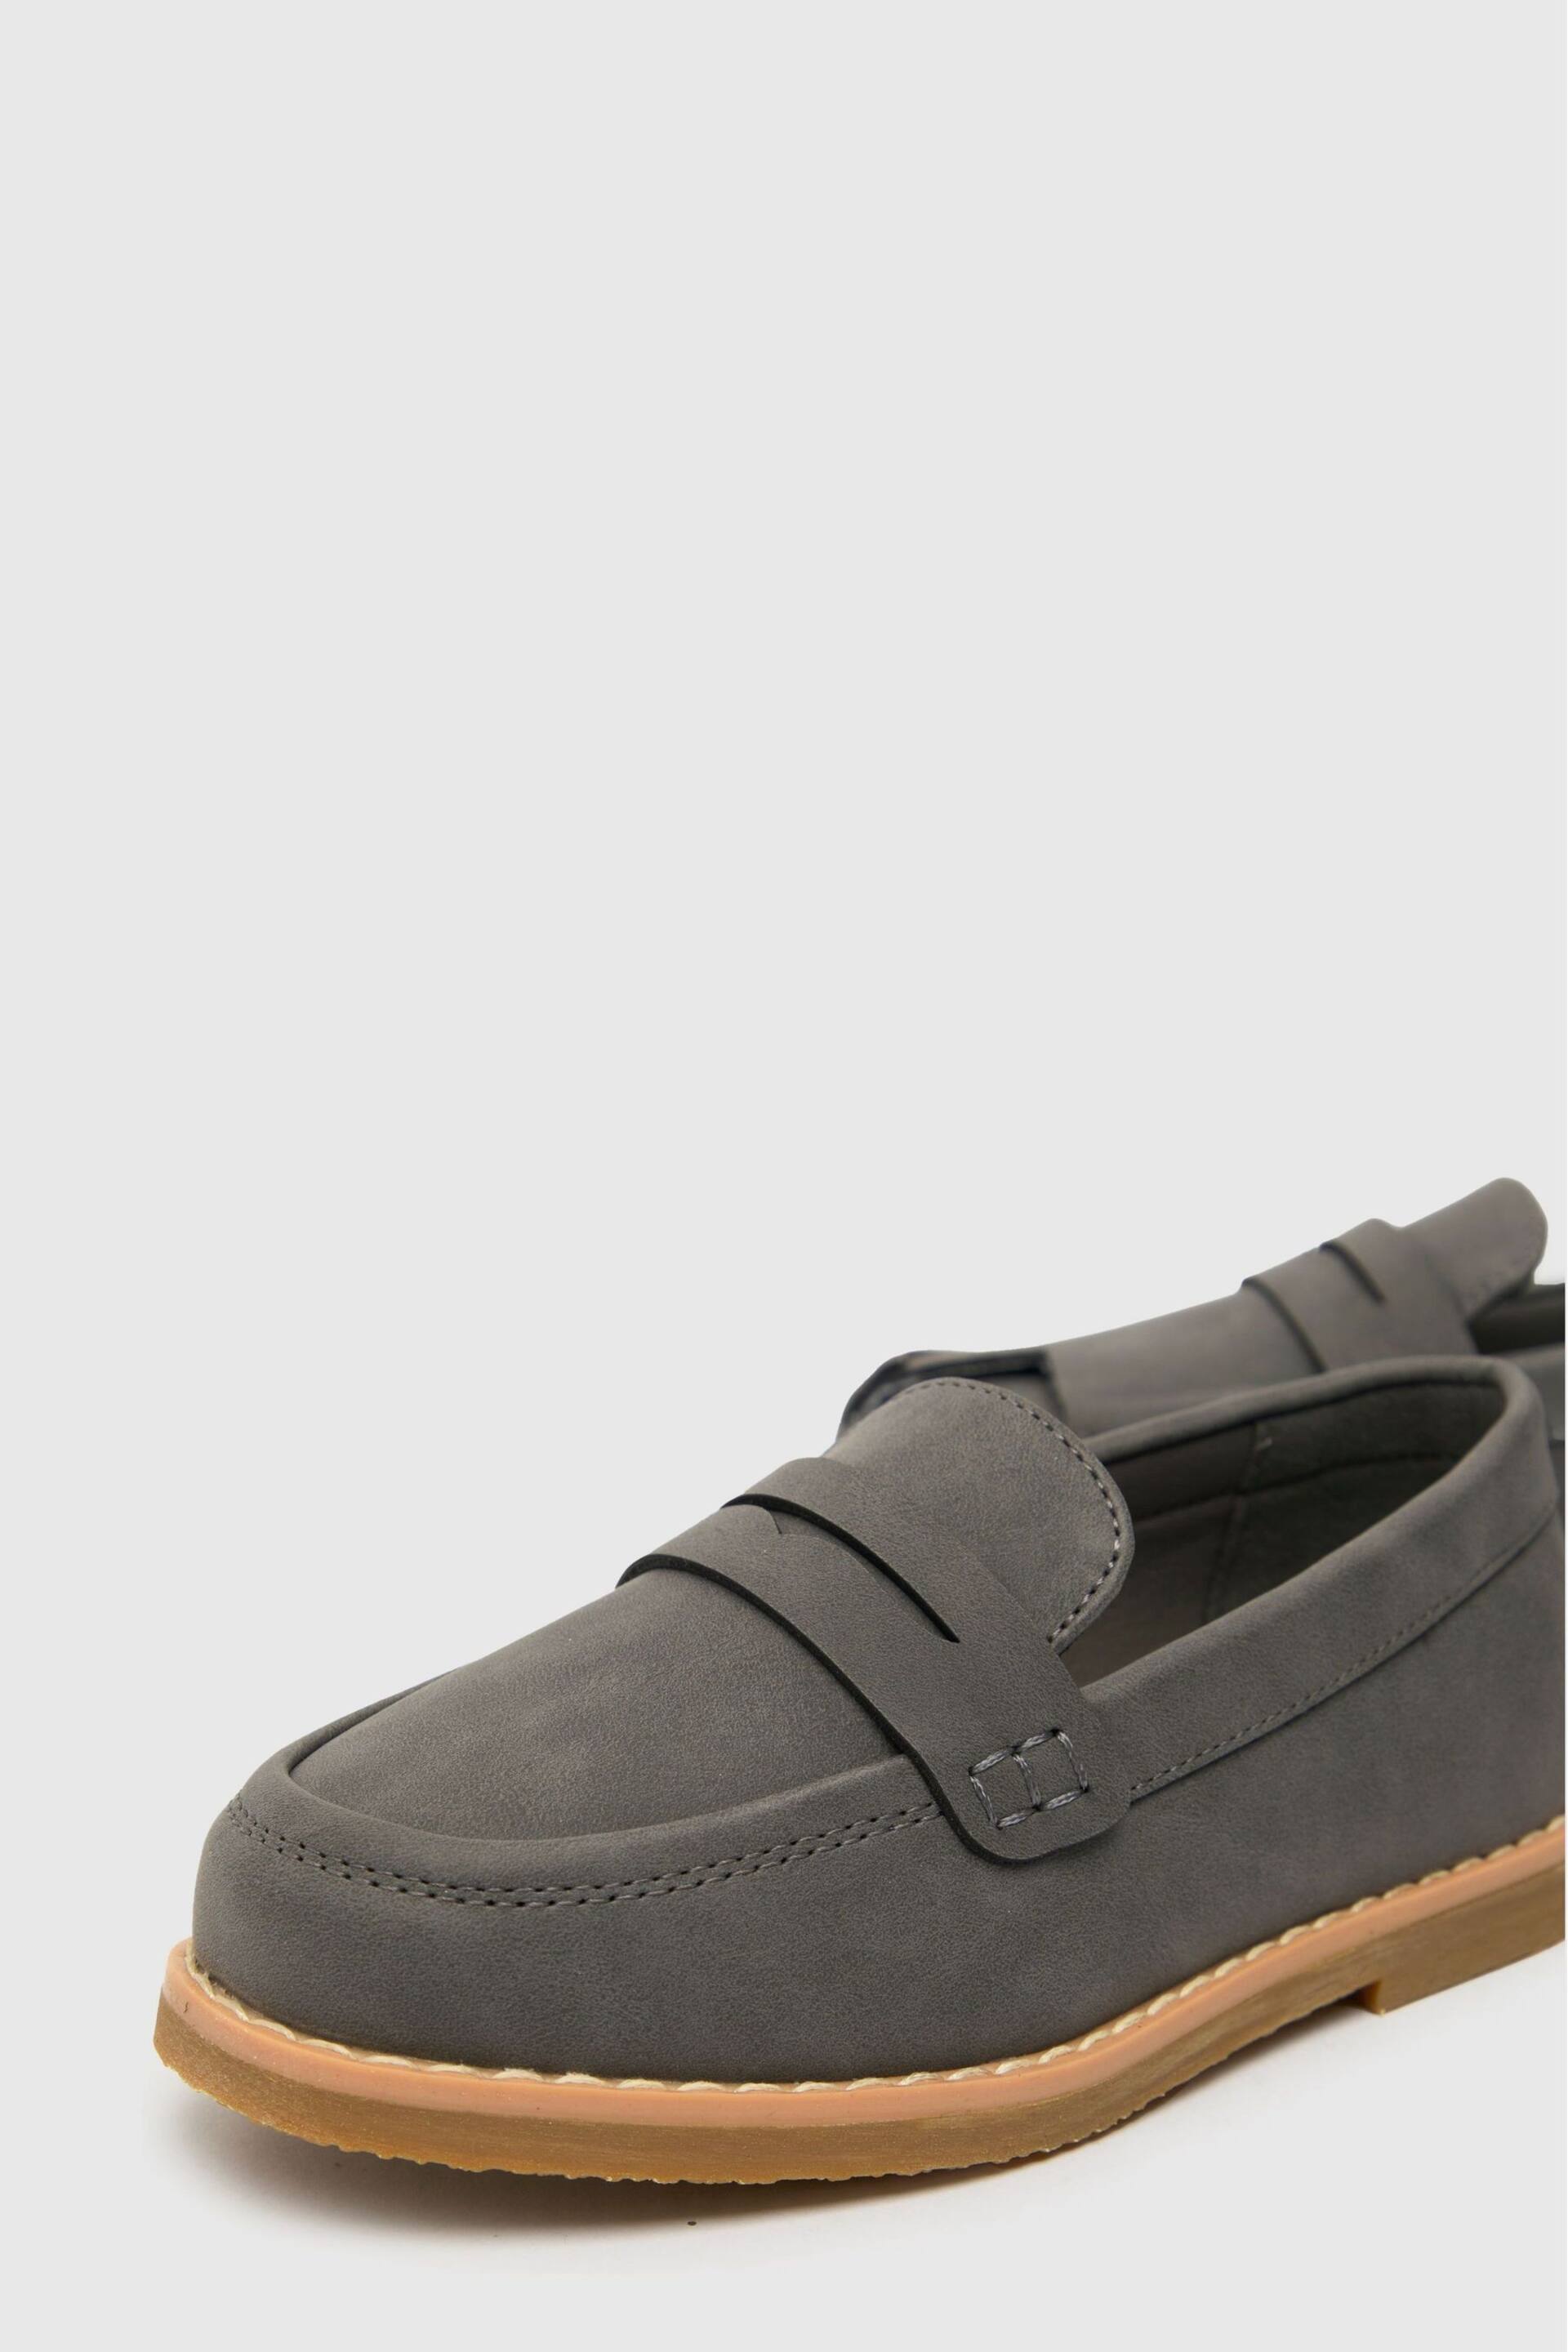 Schuh Grey Limit Loafers - Image 4 of 4